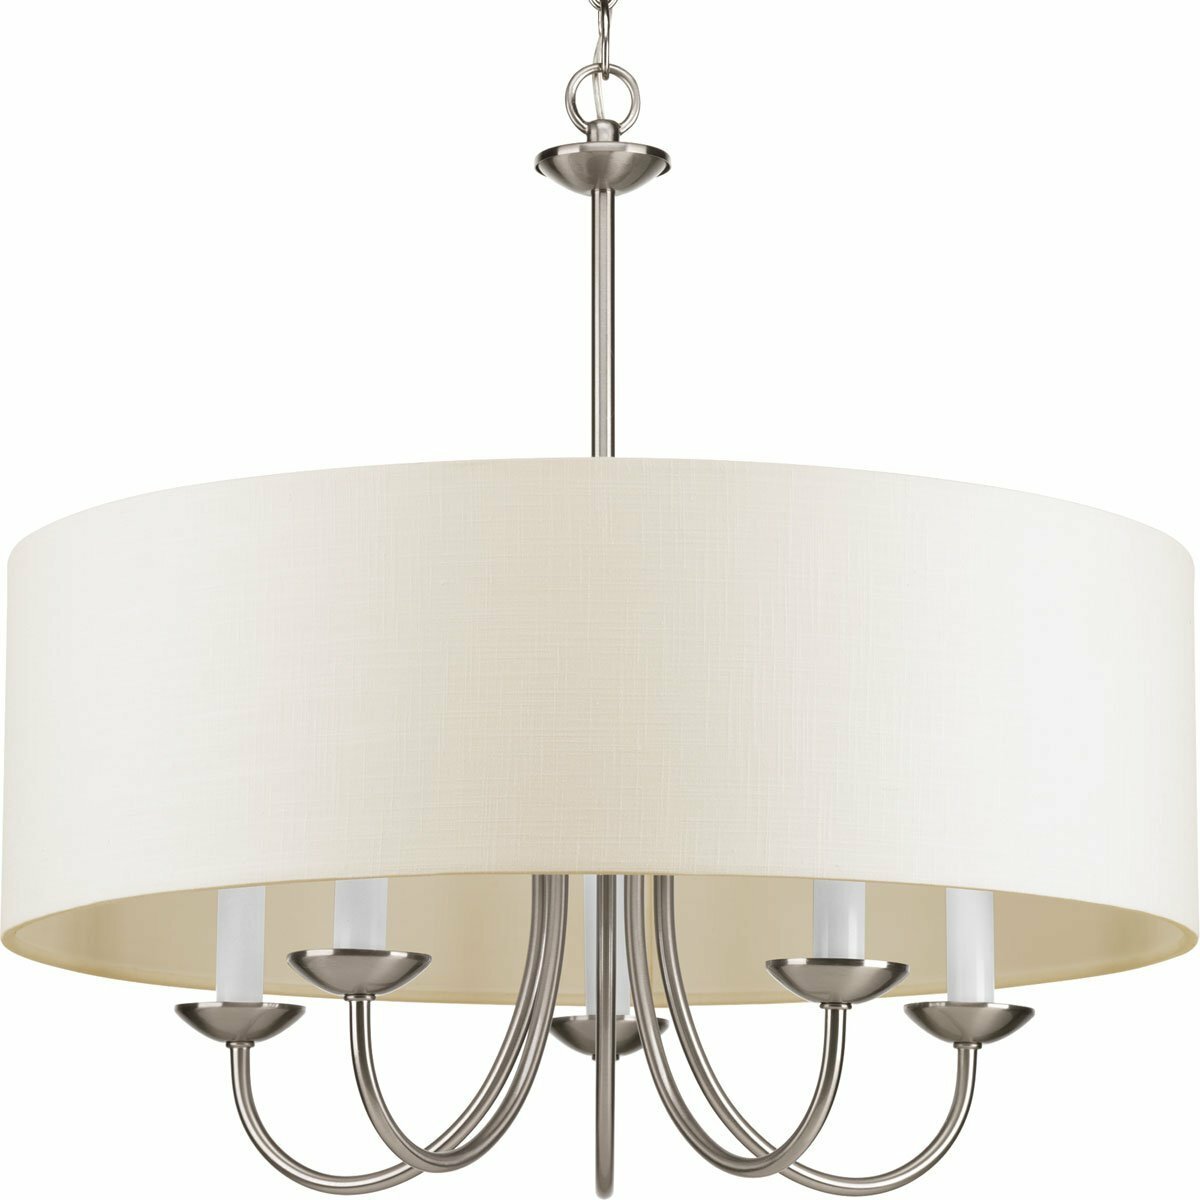 Replacement Globe for Ceiling Light | Glass Chandelier Shades | Glass Light Shades for Chandeliers